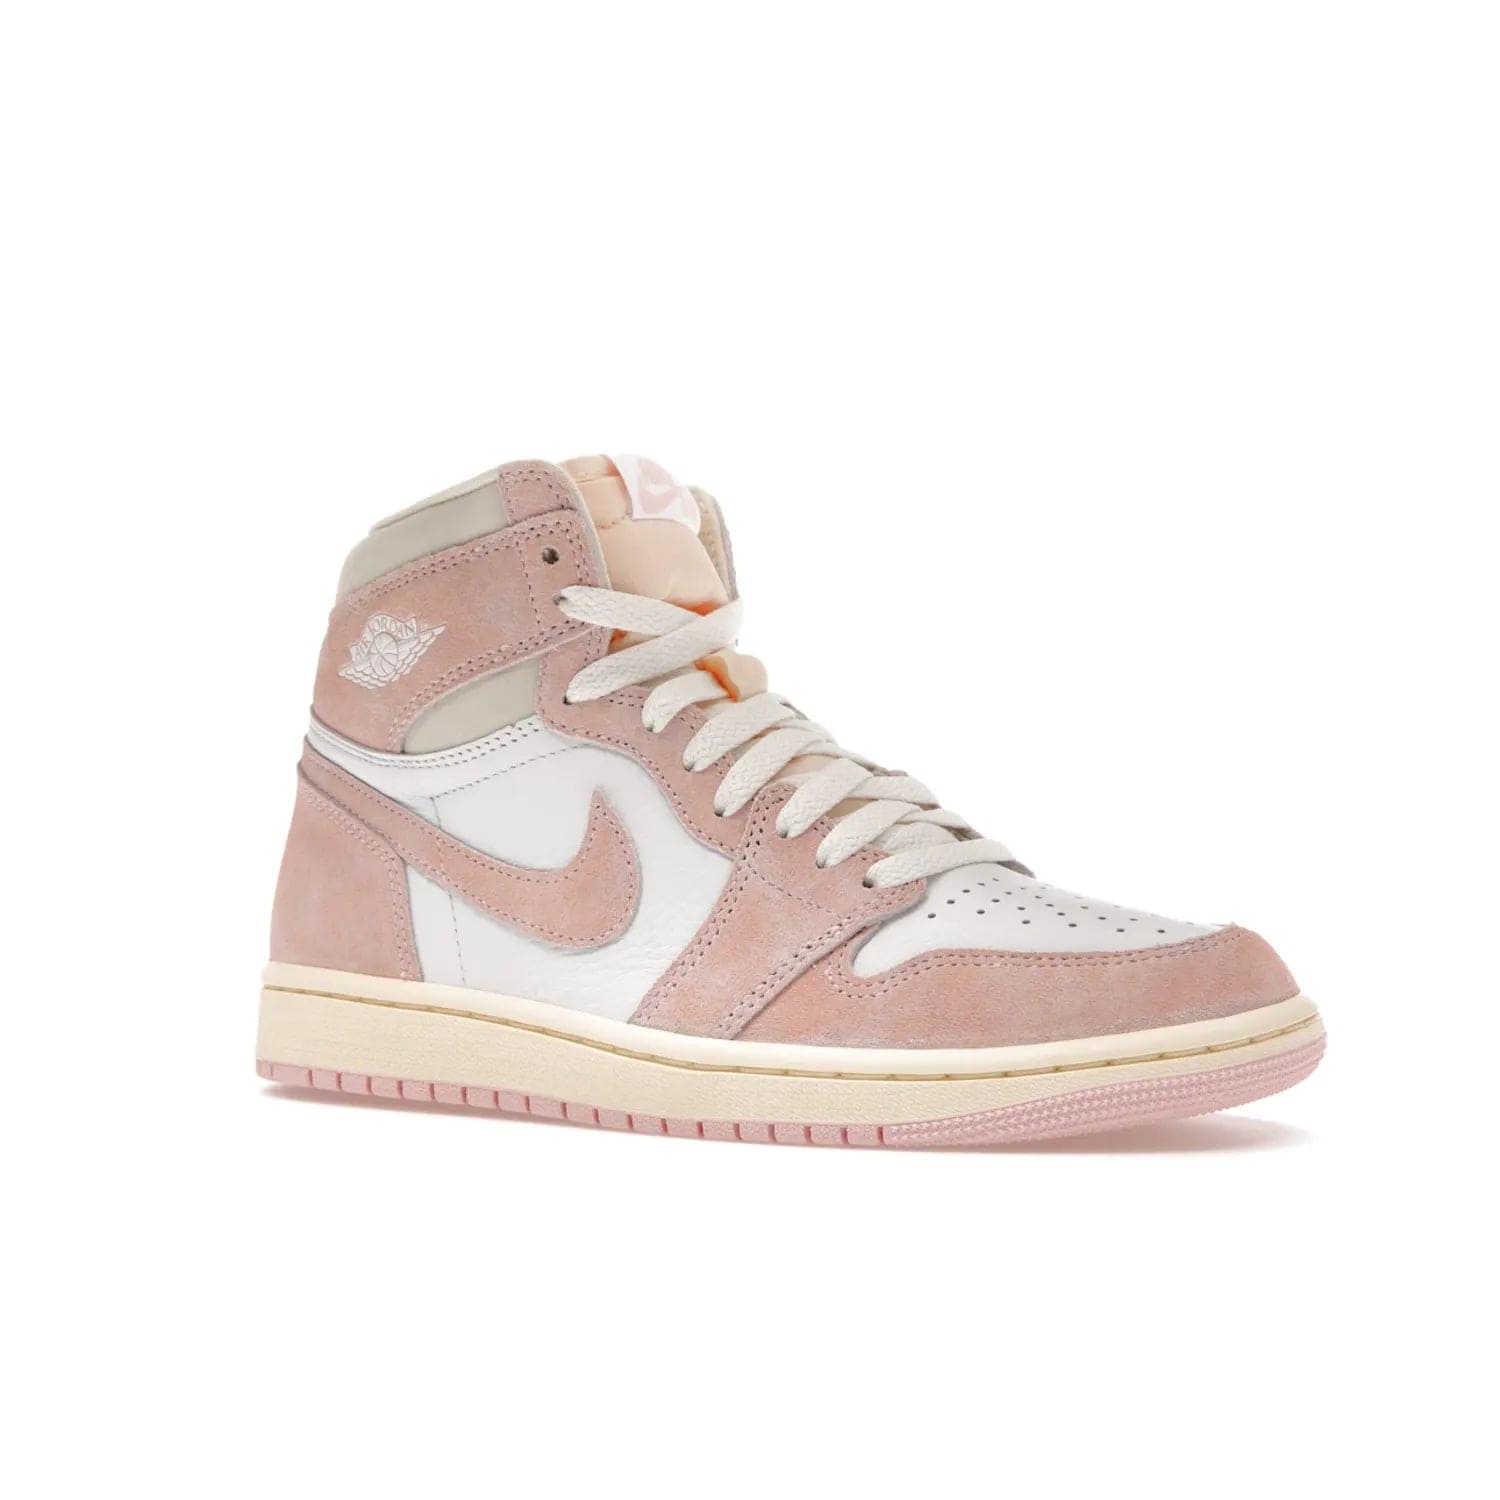 Jordan 1 Retro High OG Washed Pink (Women's) - Image 4 - Only at www.BallersClubKickz.com - Iconic Air Jordan 1 Retro High OG for women with unique pink suede and white leather uppers. Get the timeless look on April 22, 2023.